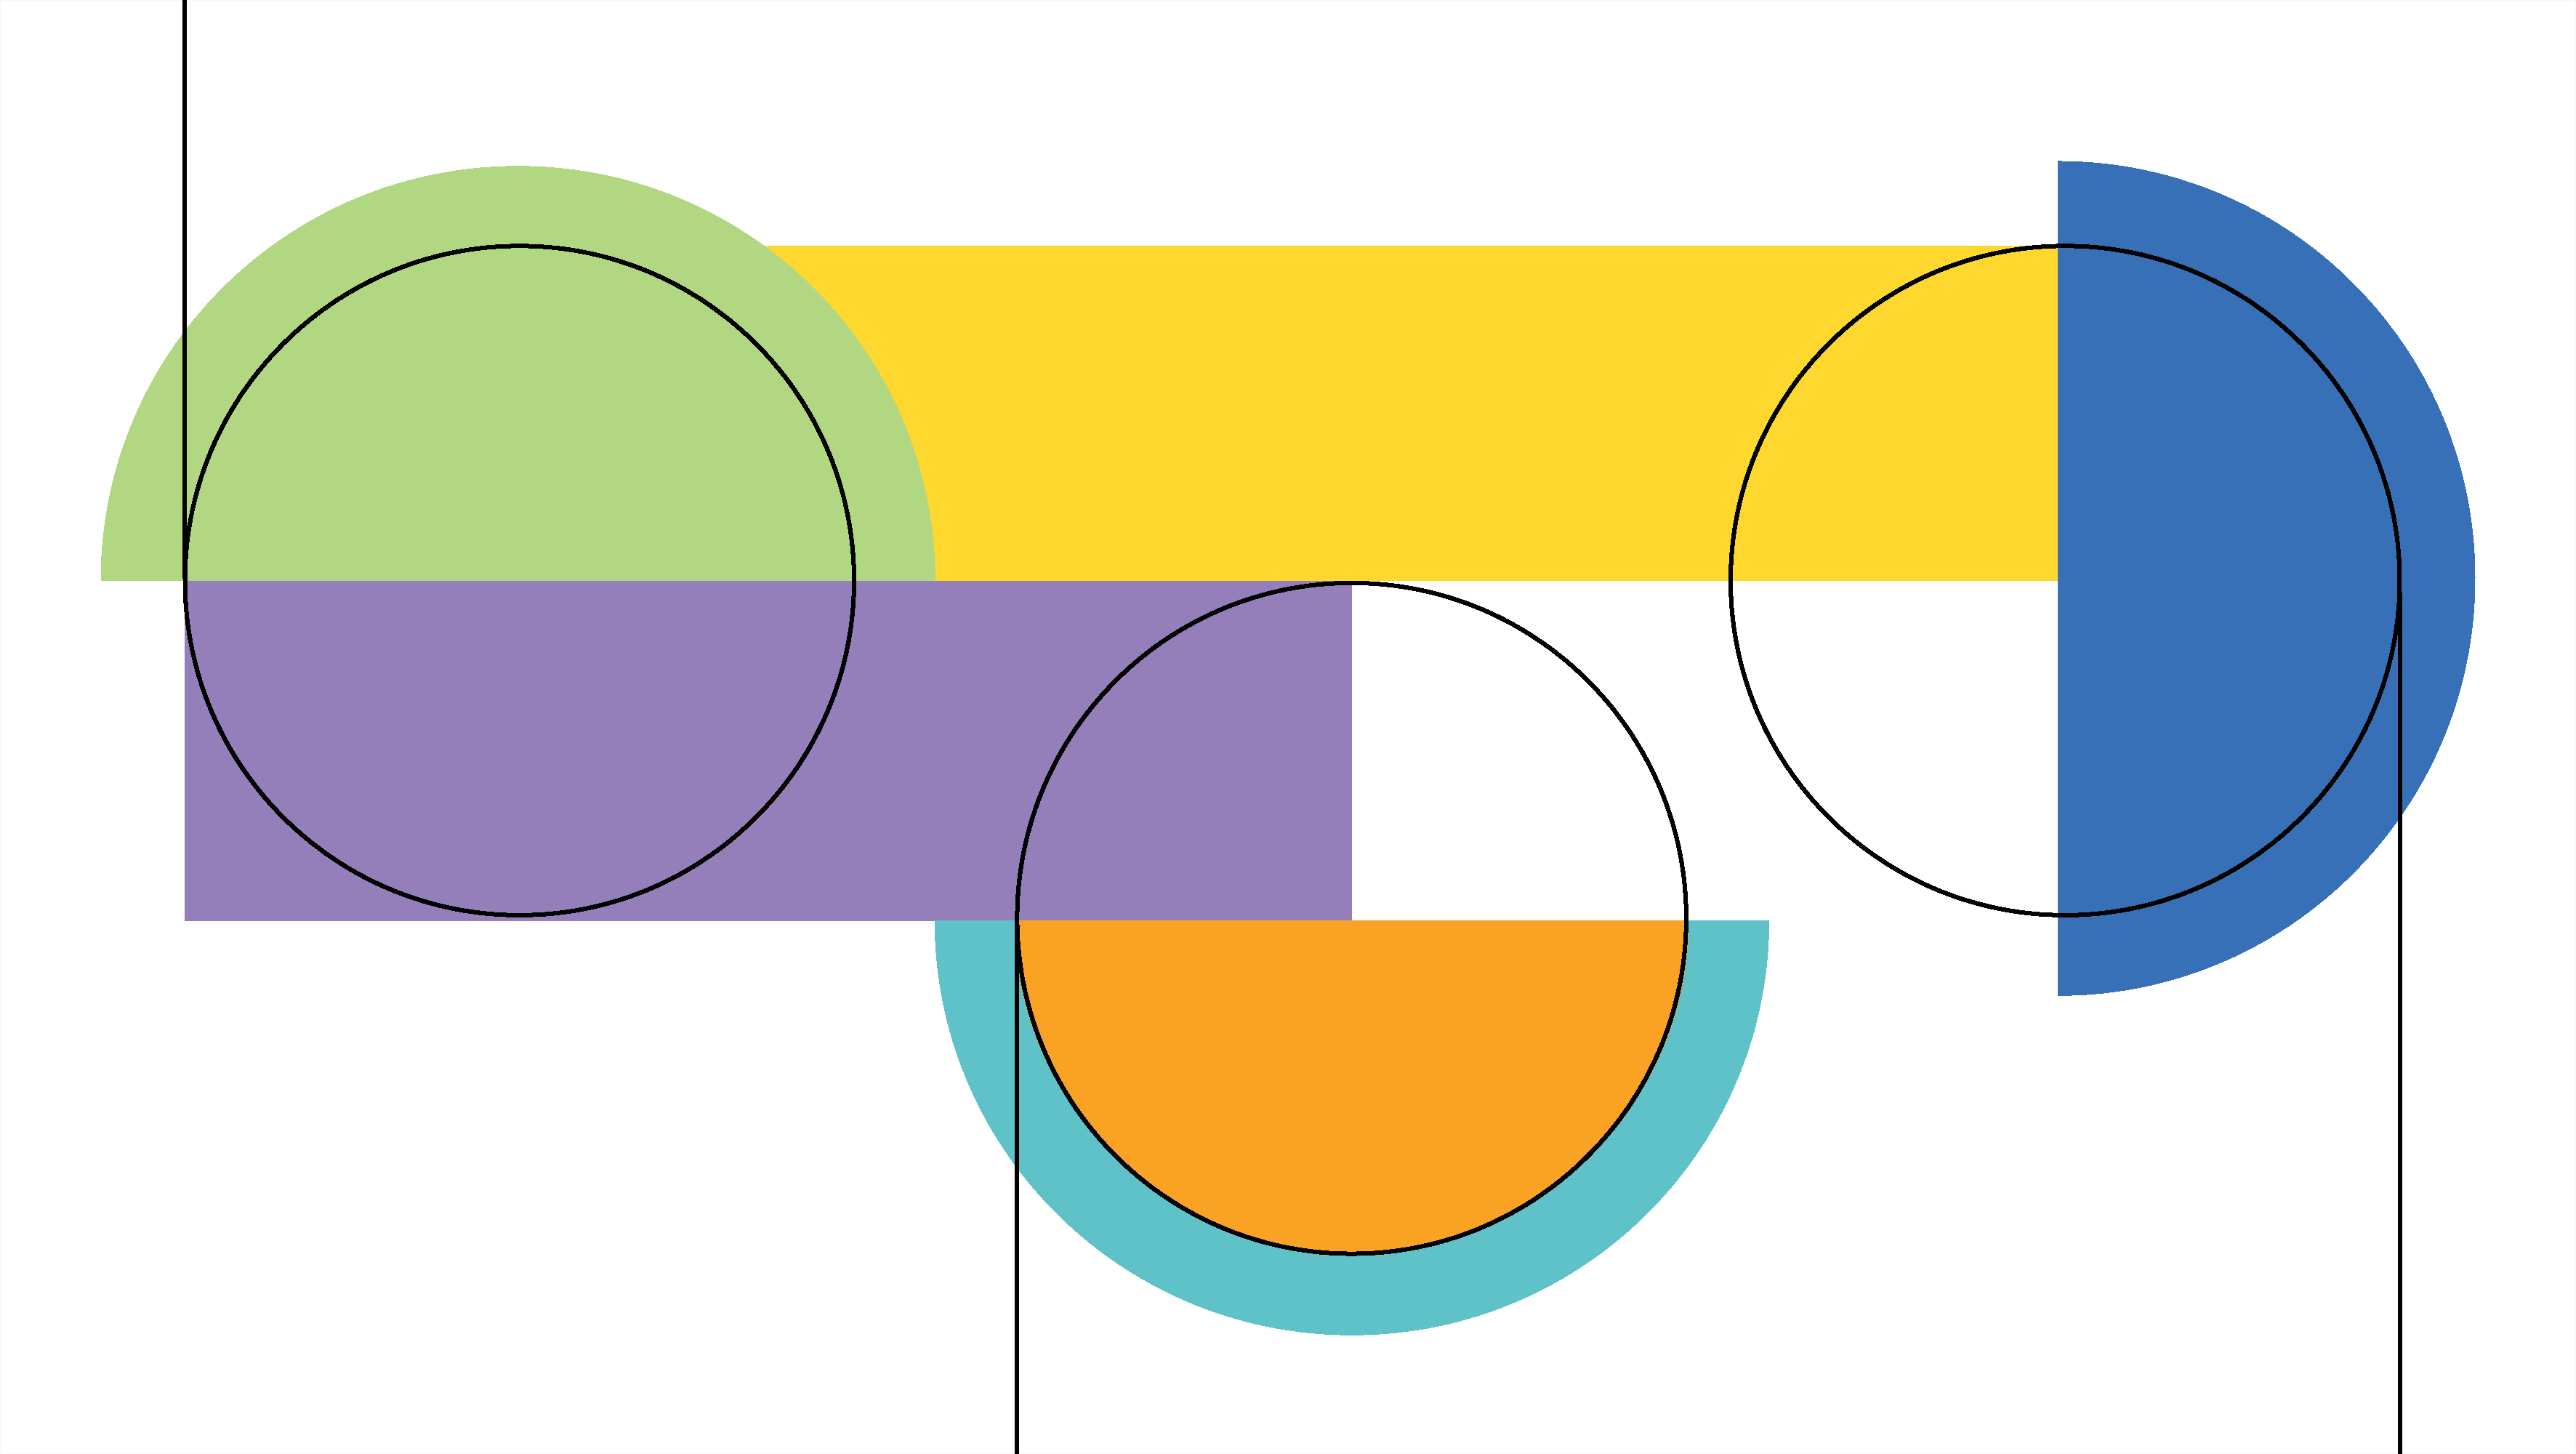 Abstract image of circles and colored rectangles.